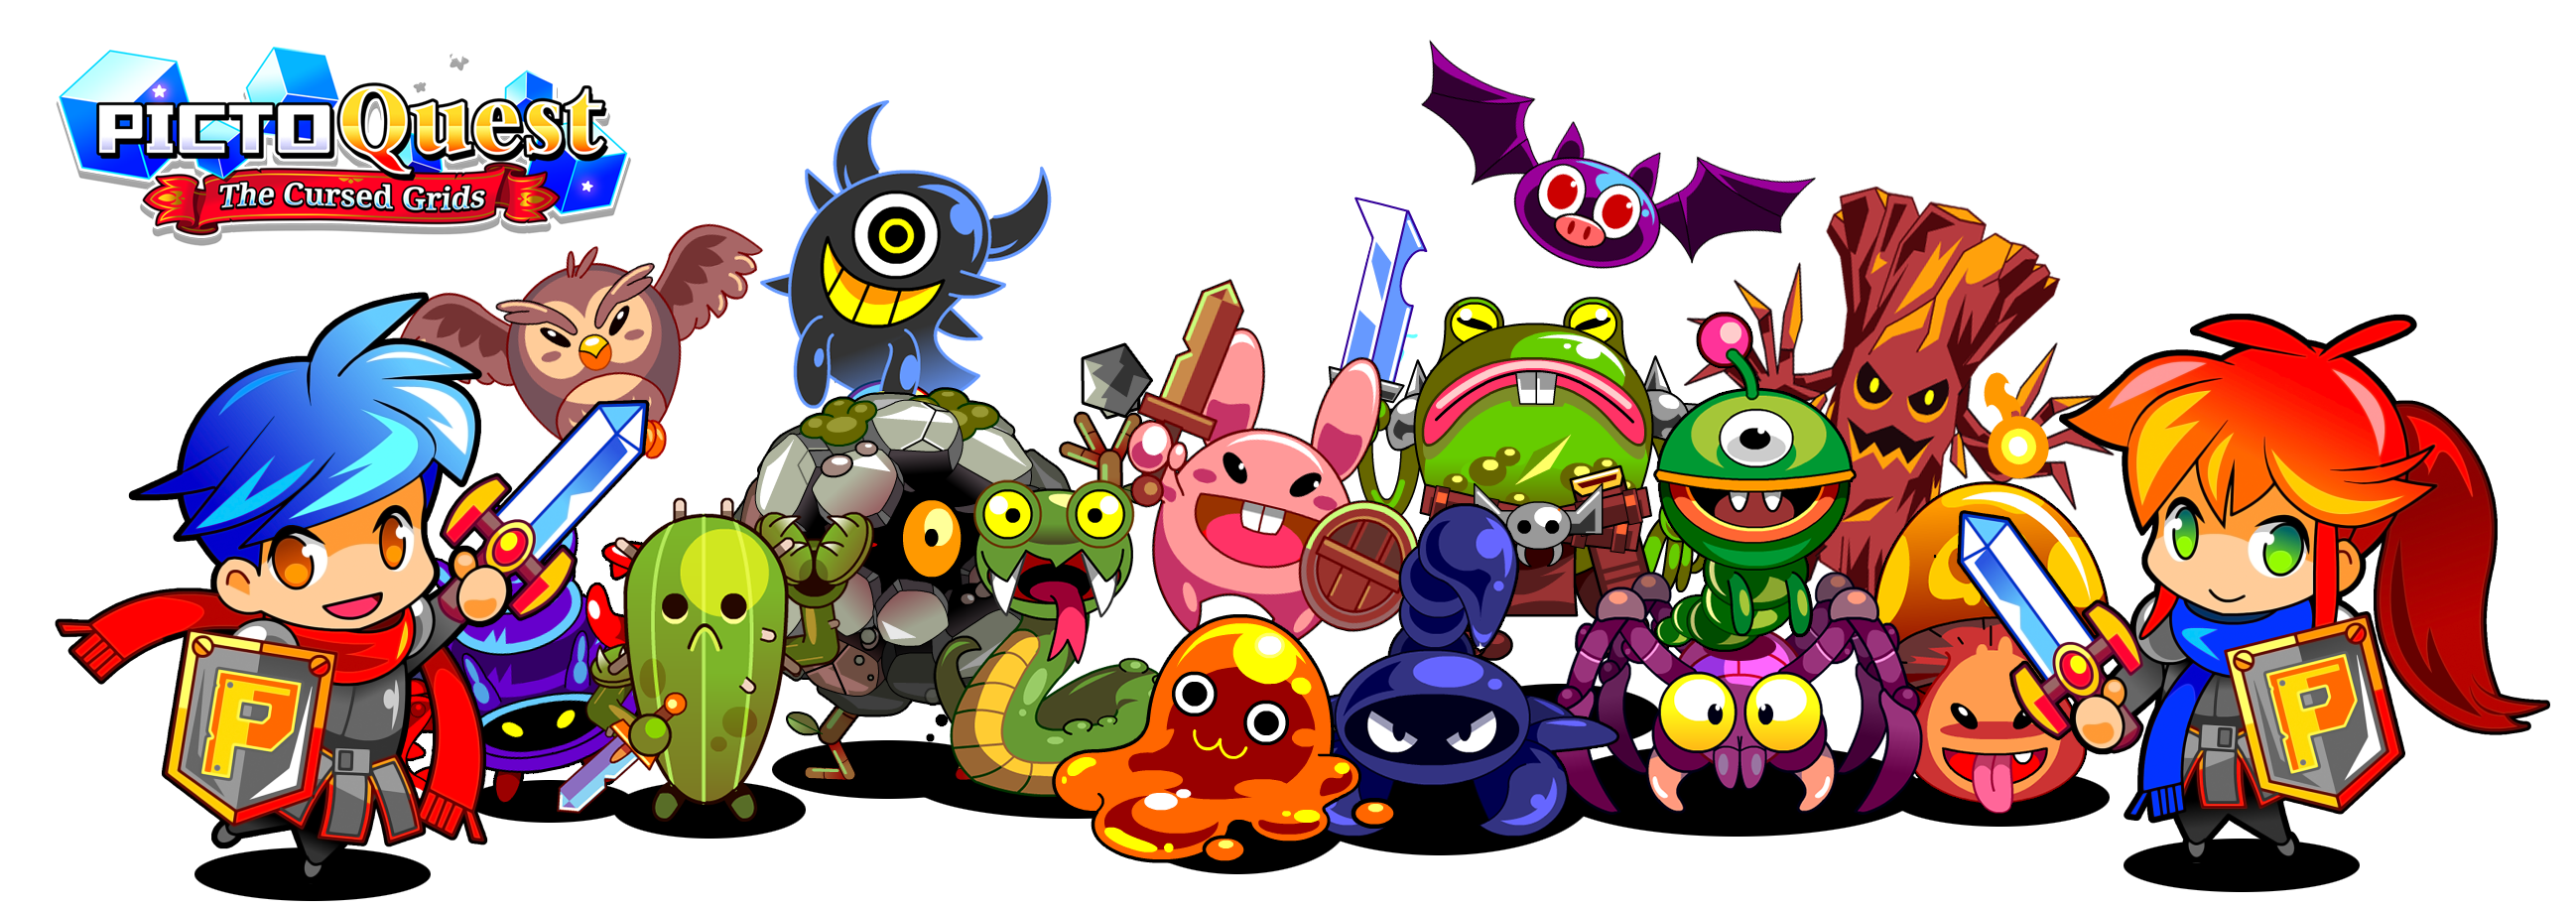 Banner image showing several of the monsters from the game, as well as the two protagonists, a male knight with blue hair and a female knight with long red hair